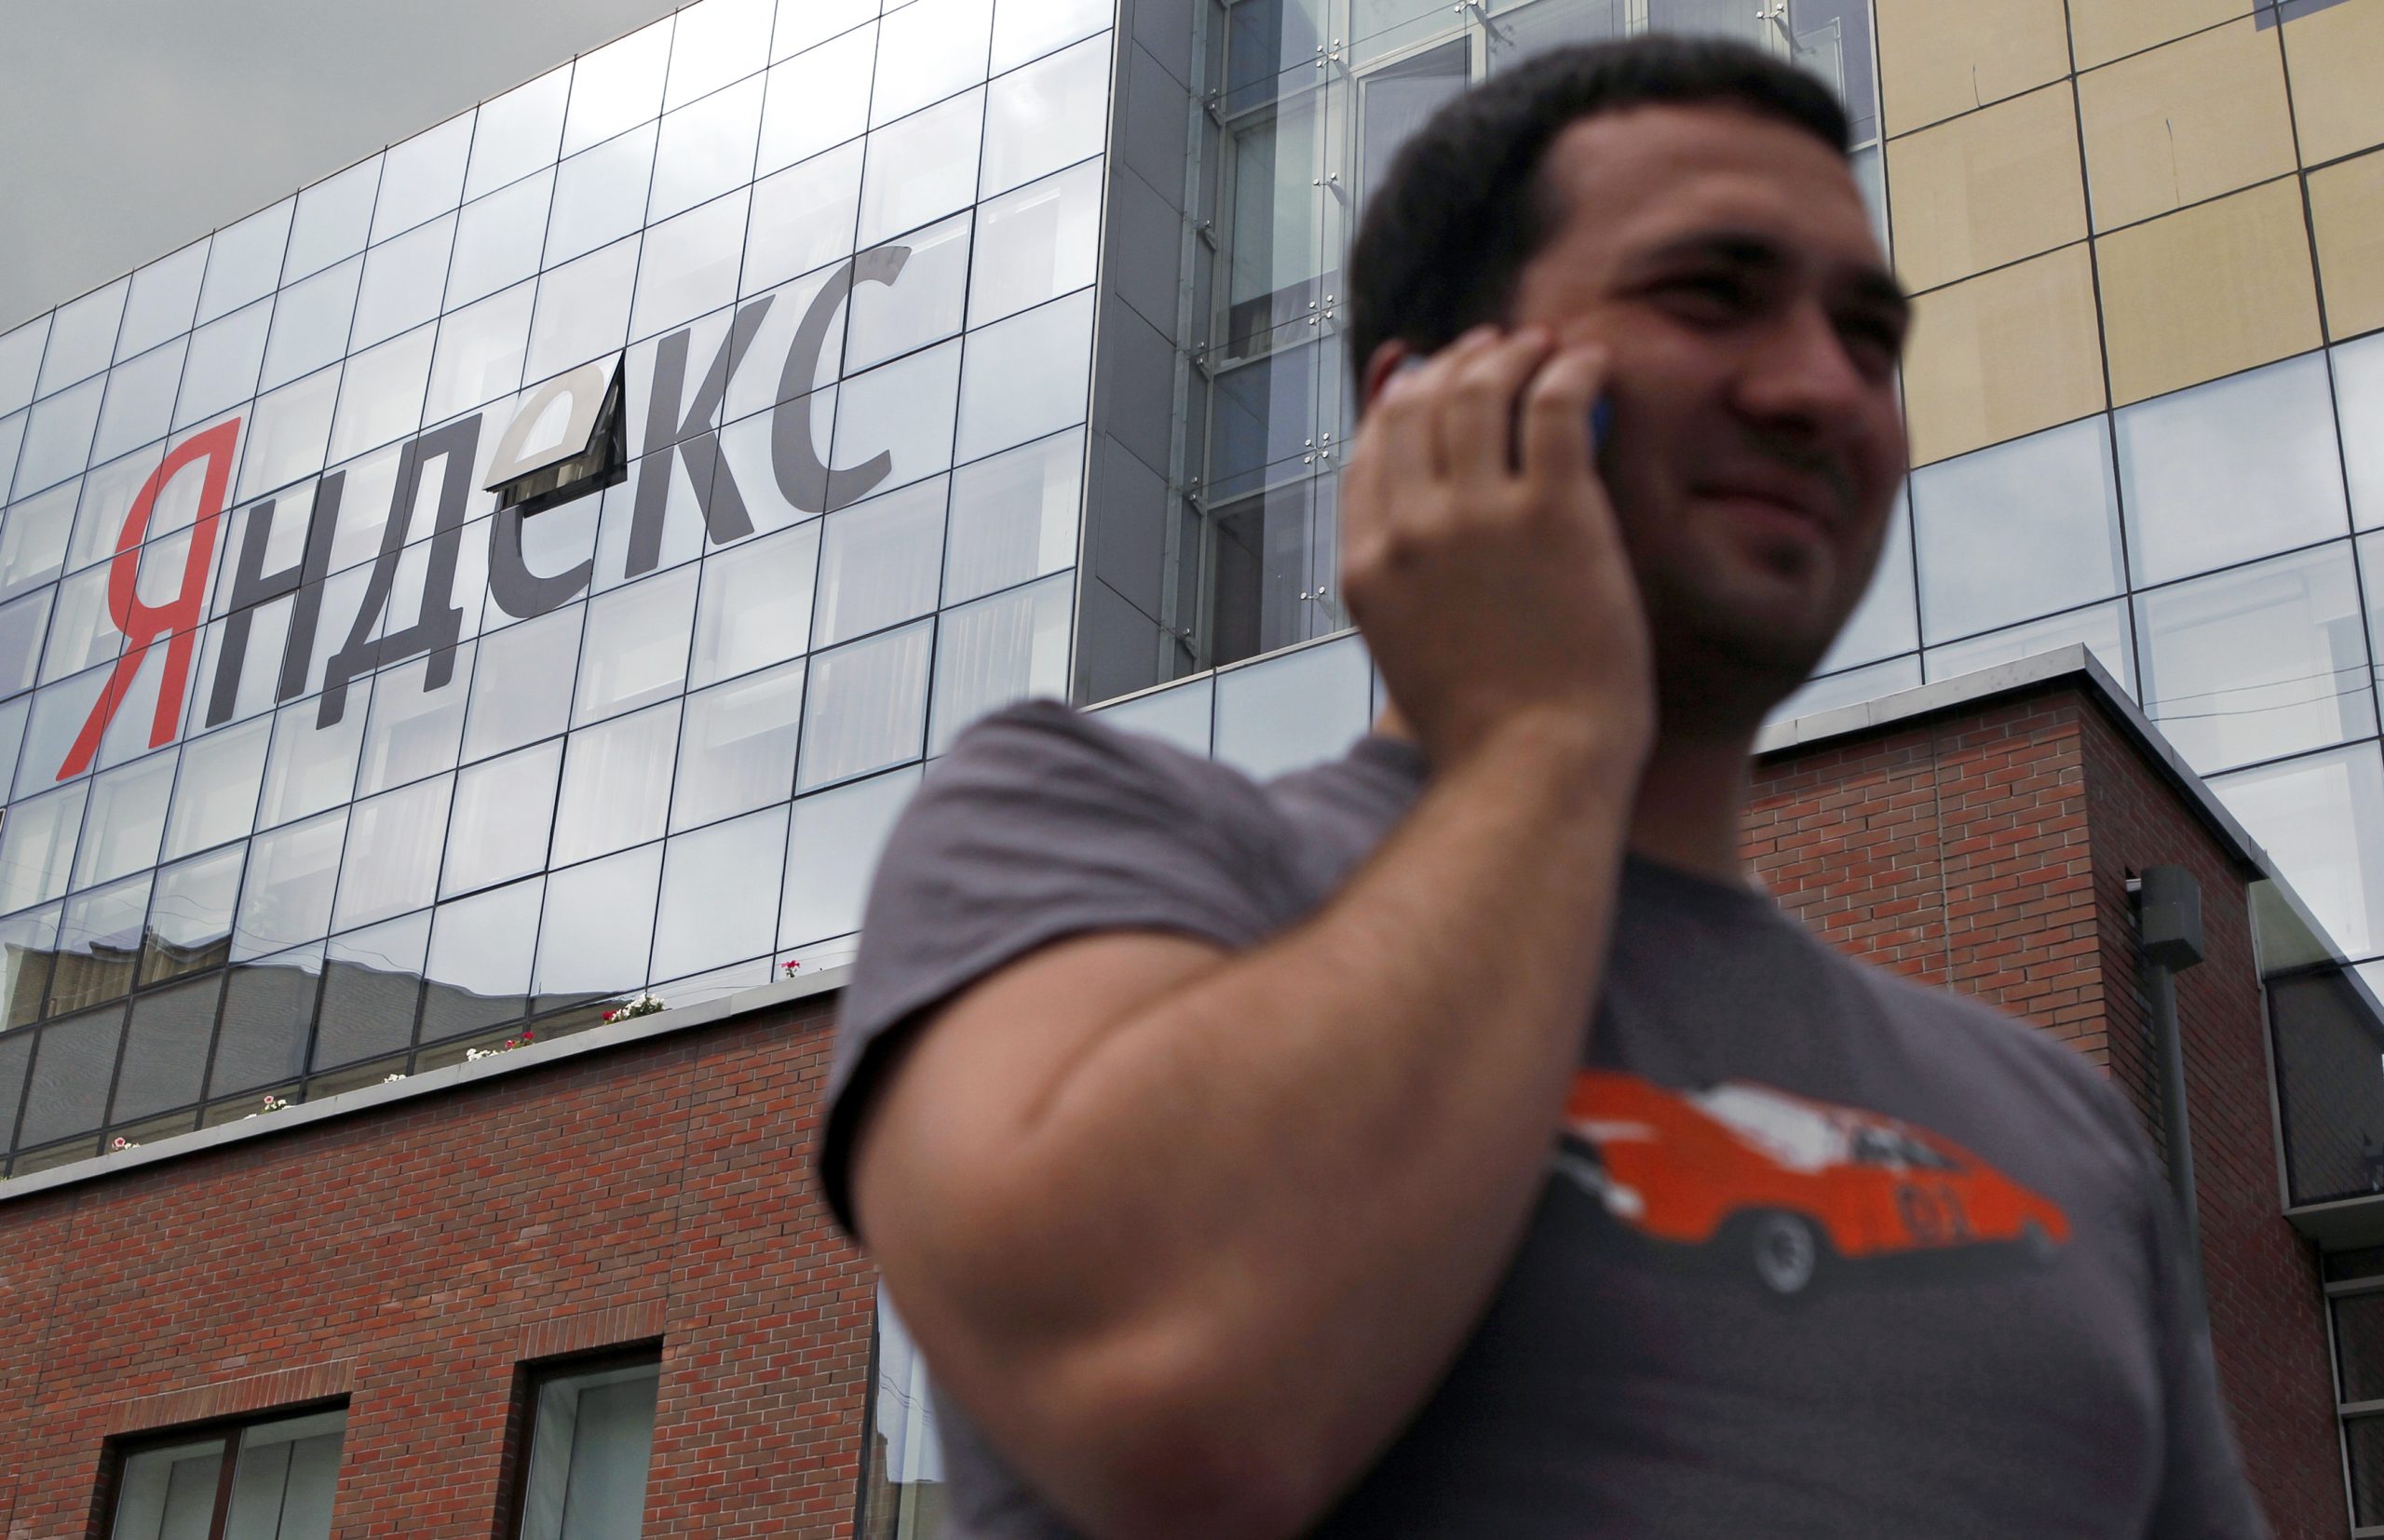 Photo: A man speaks on a mobile phone outside the headquarters of Yandex company in Moscow June 14, 2012. Credit: REUTERS/Maxim Shemetov